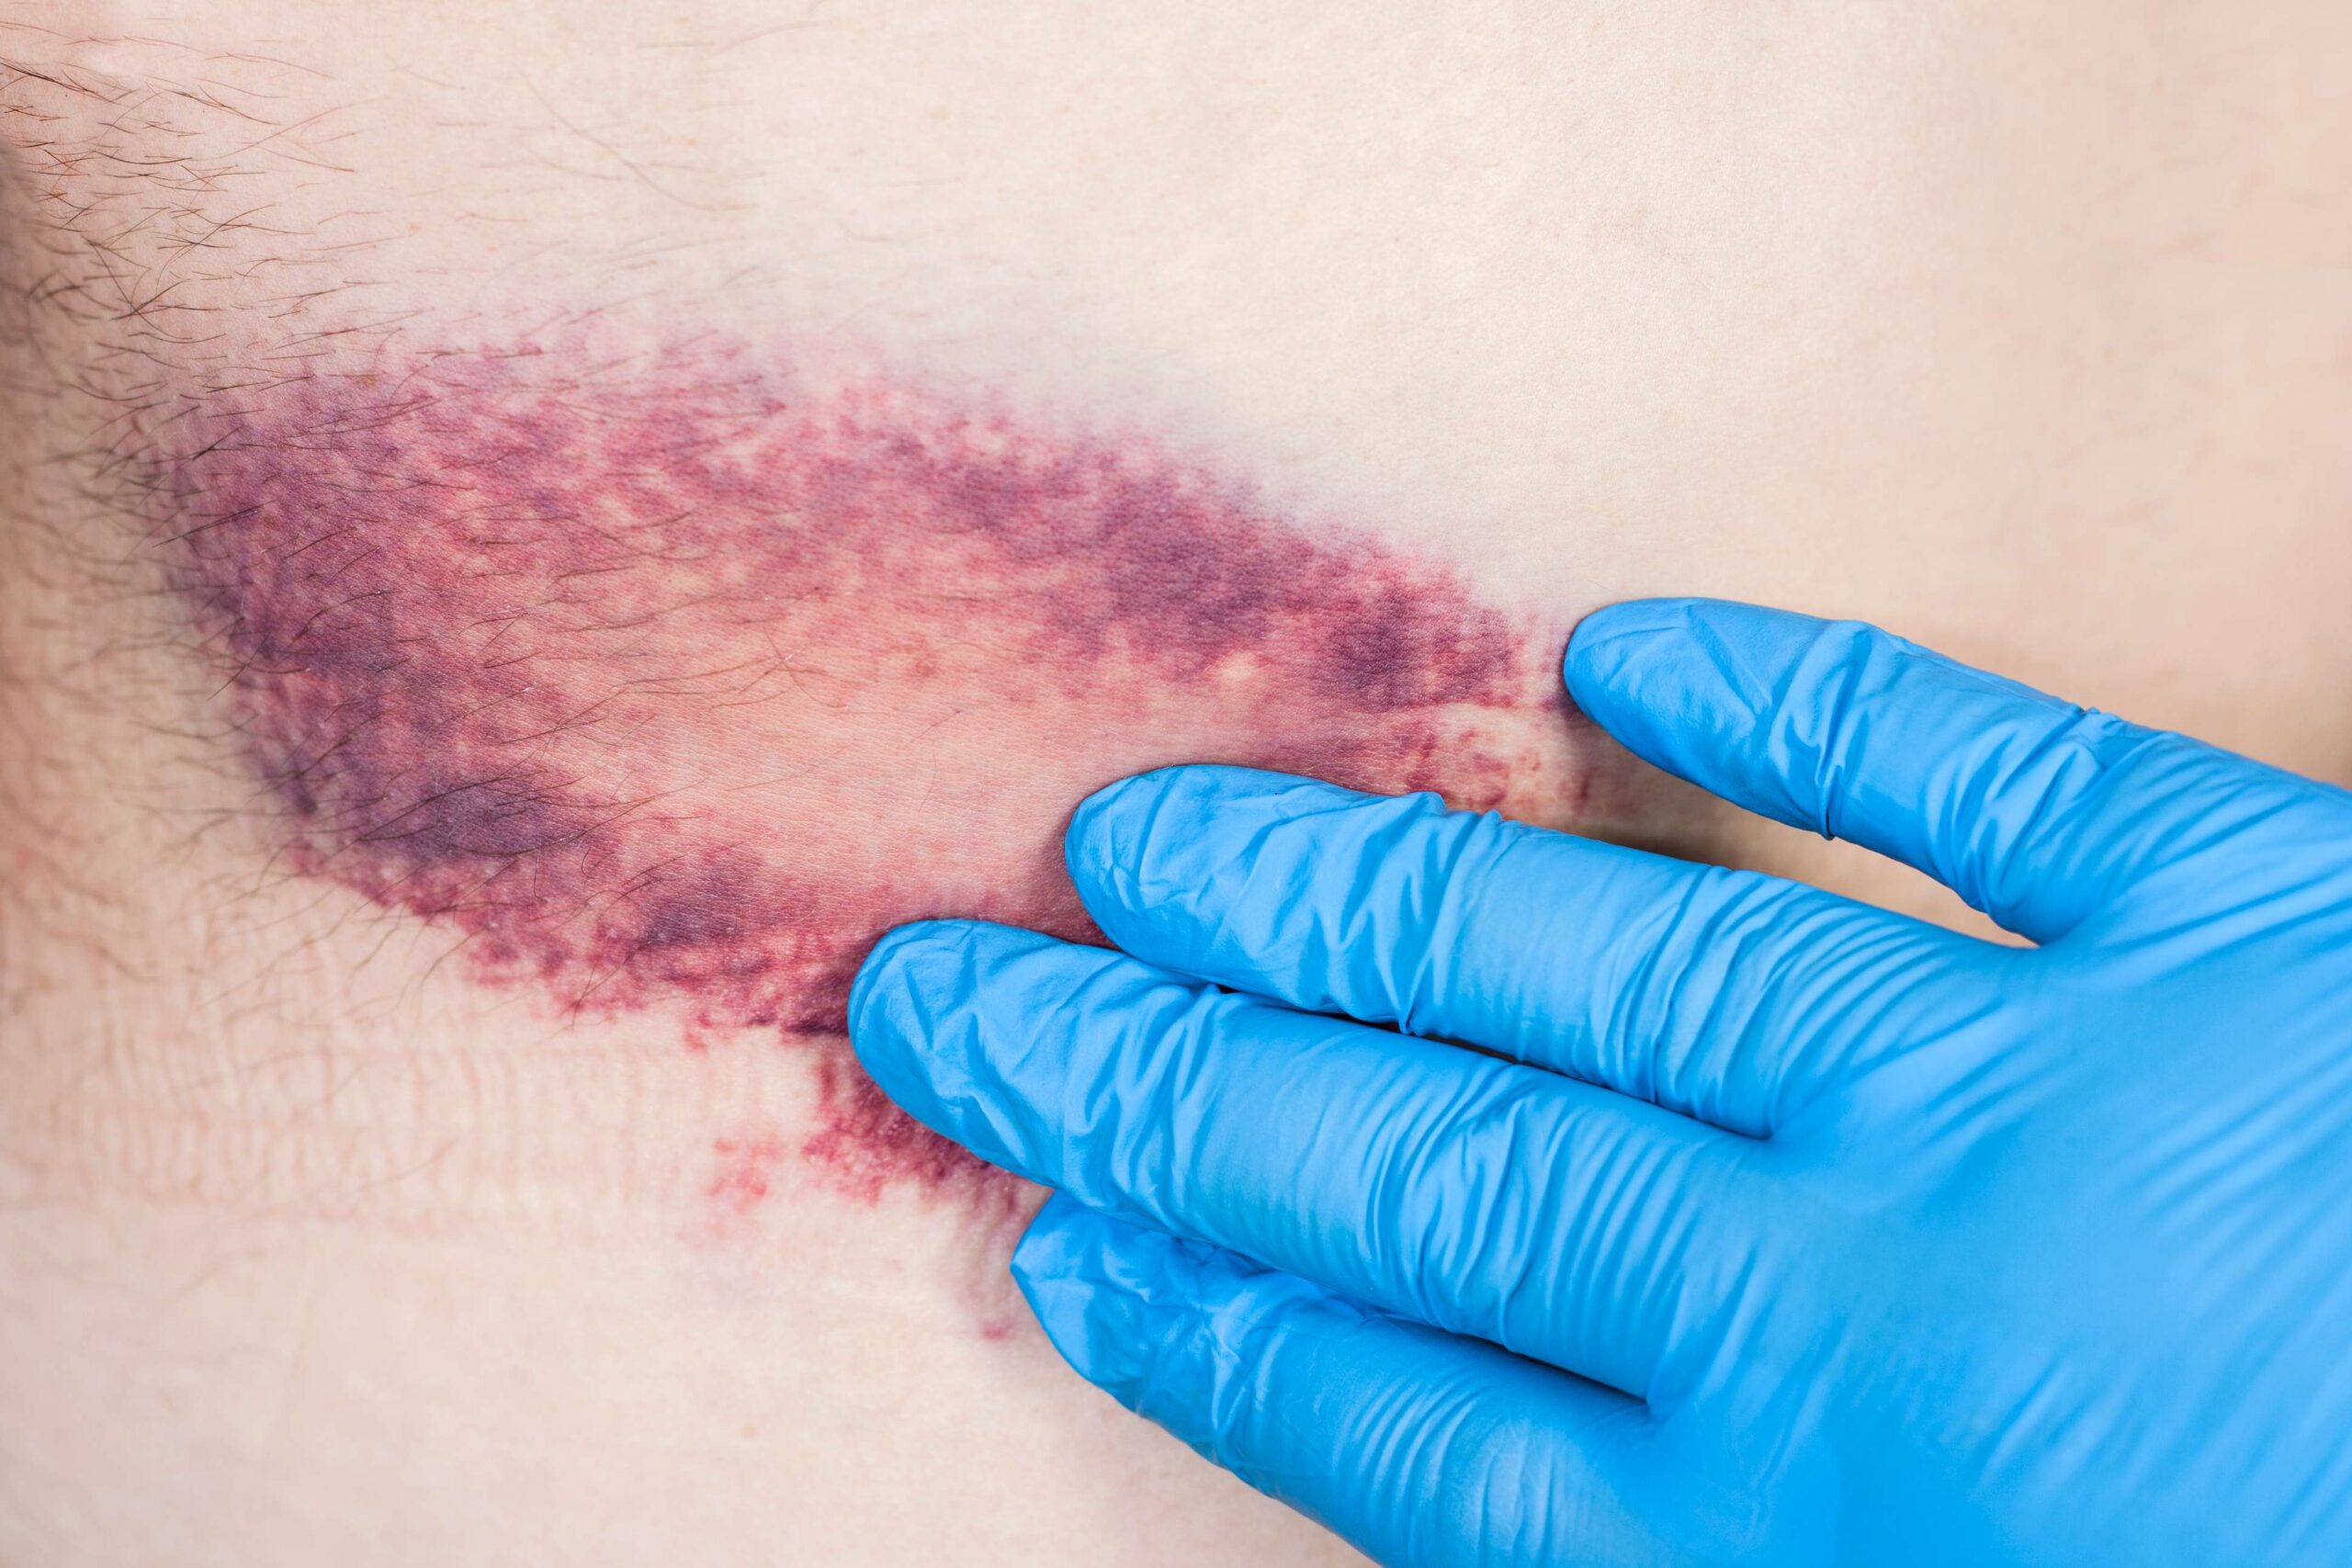 What causes bruises on older adults?